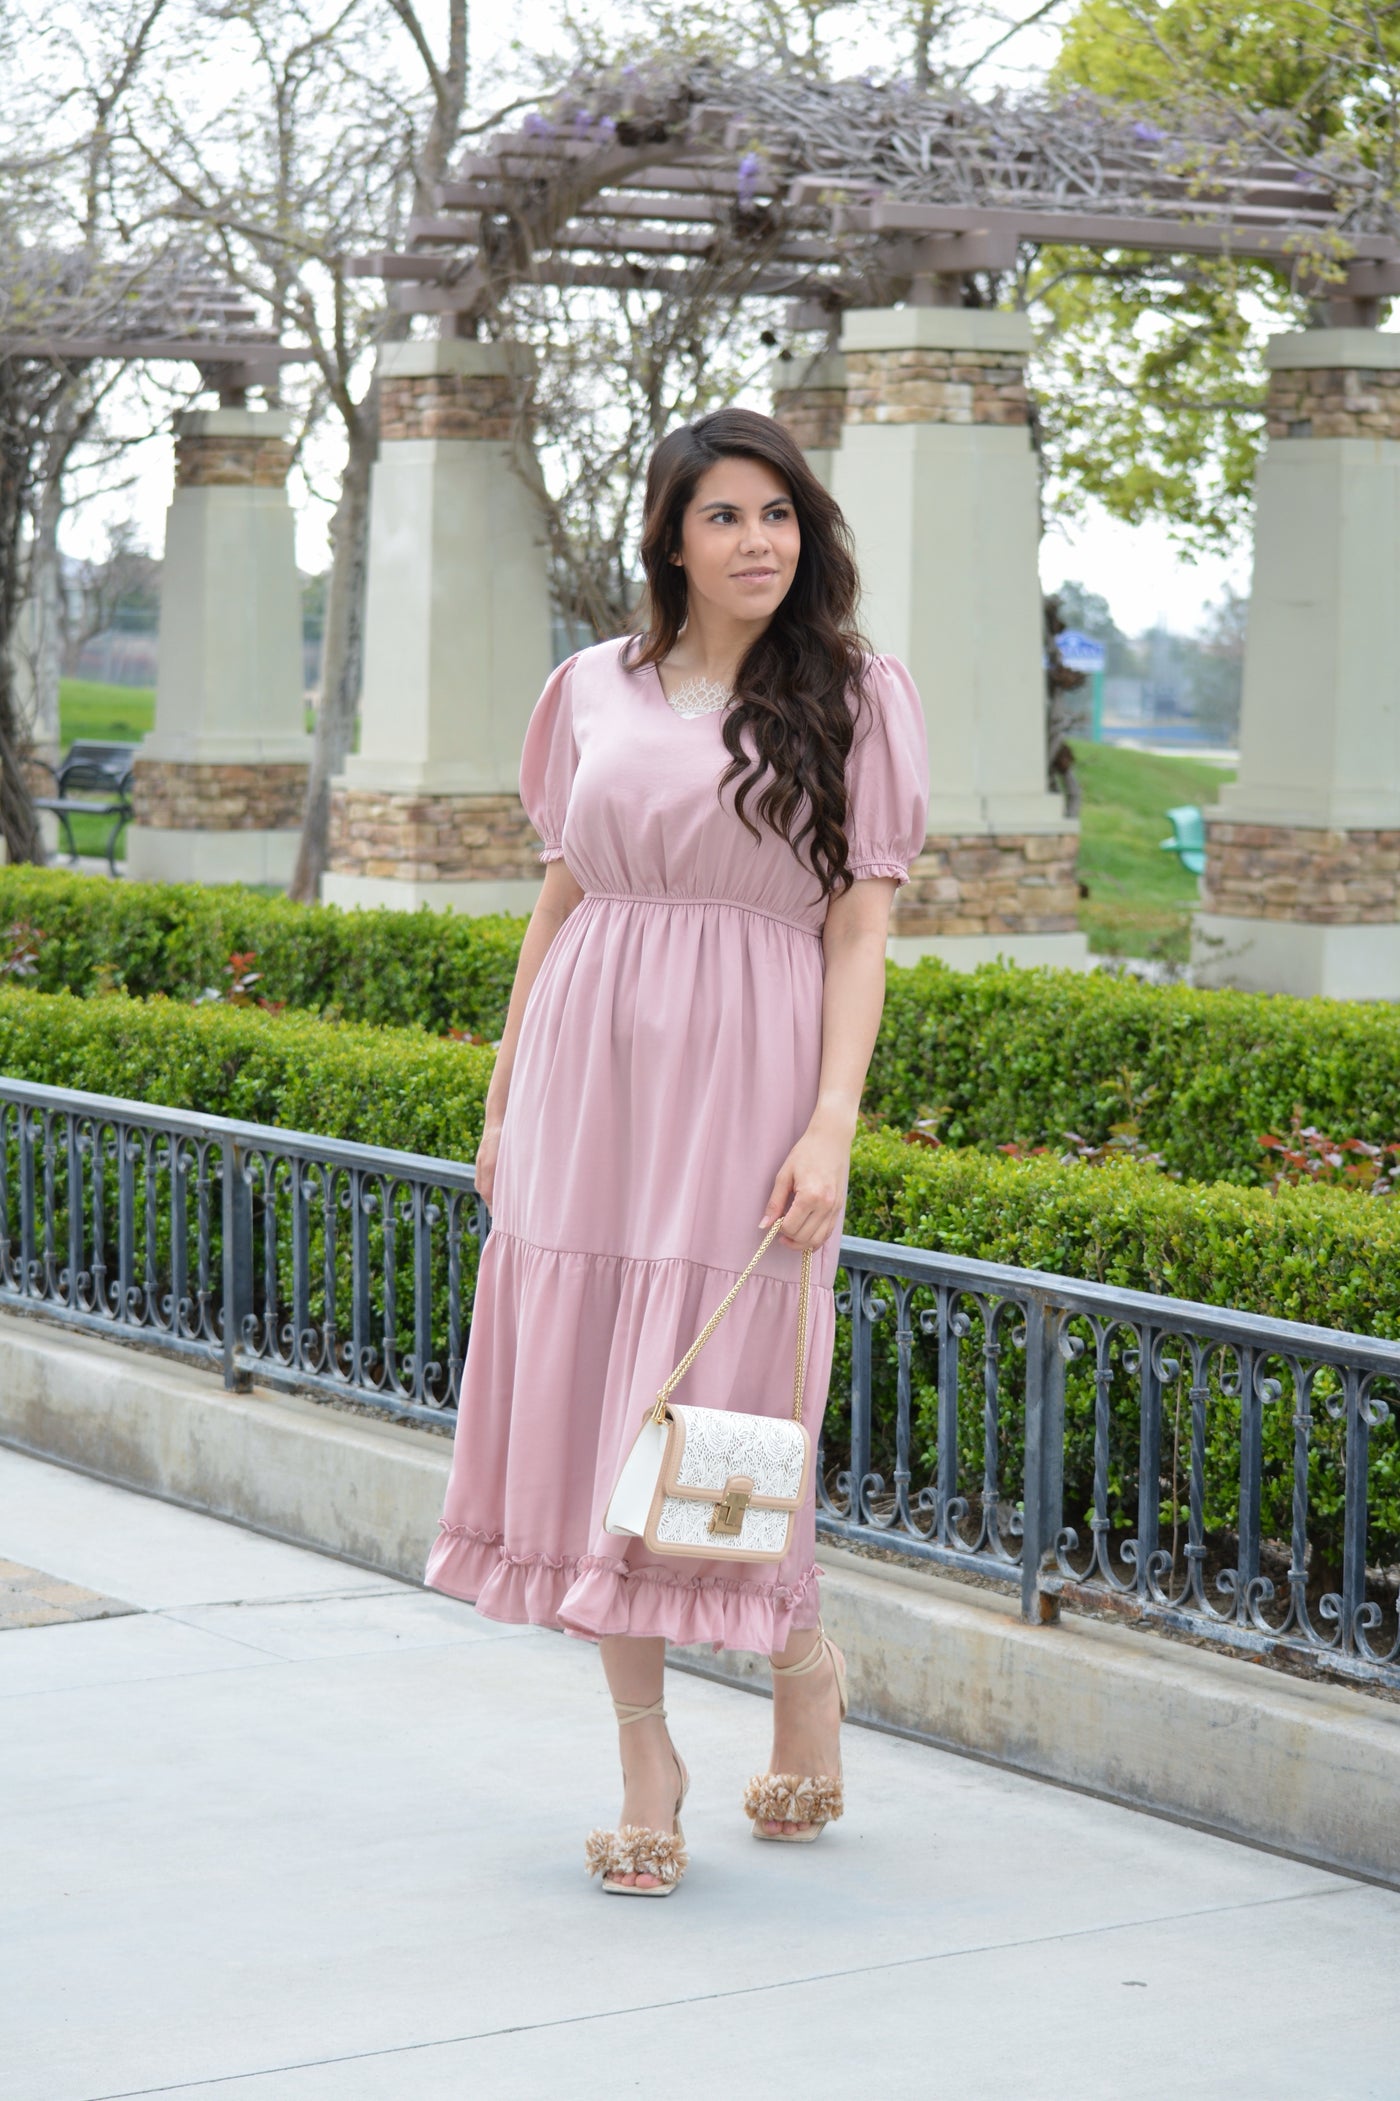 Guinevere Warm Pink Dress